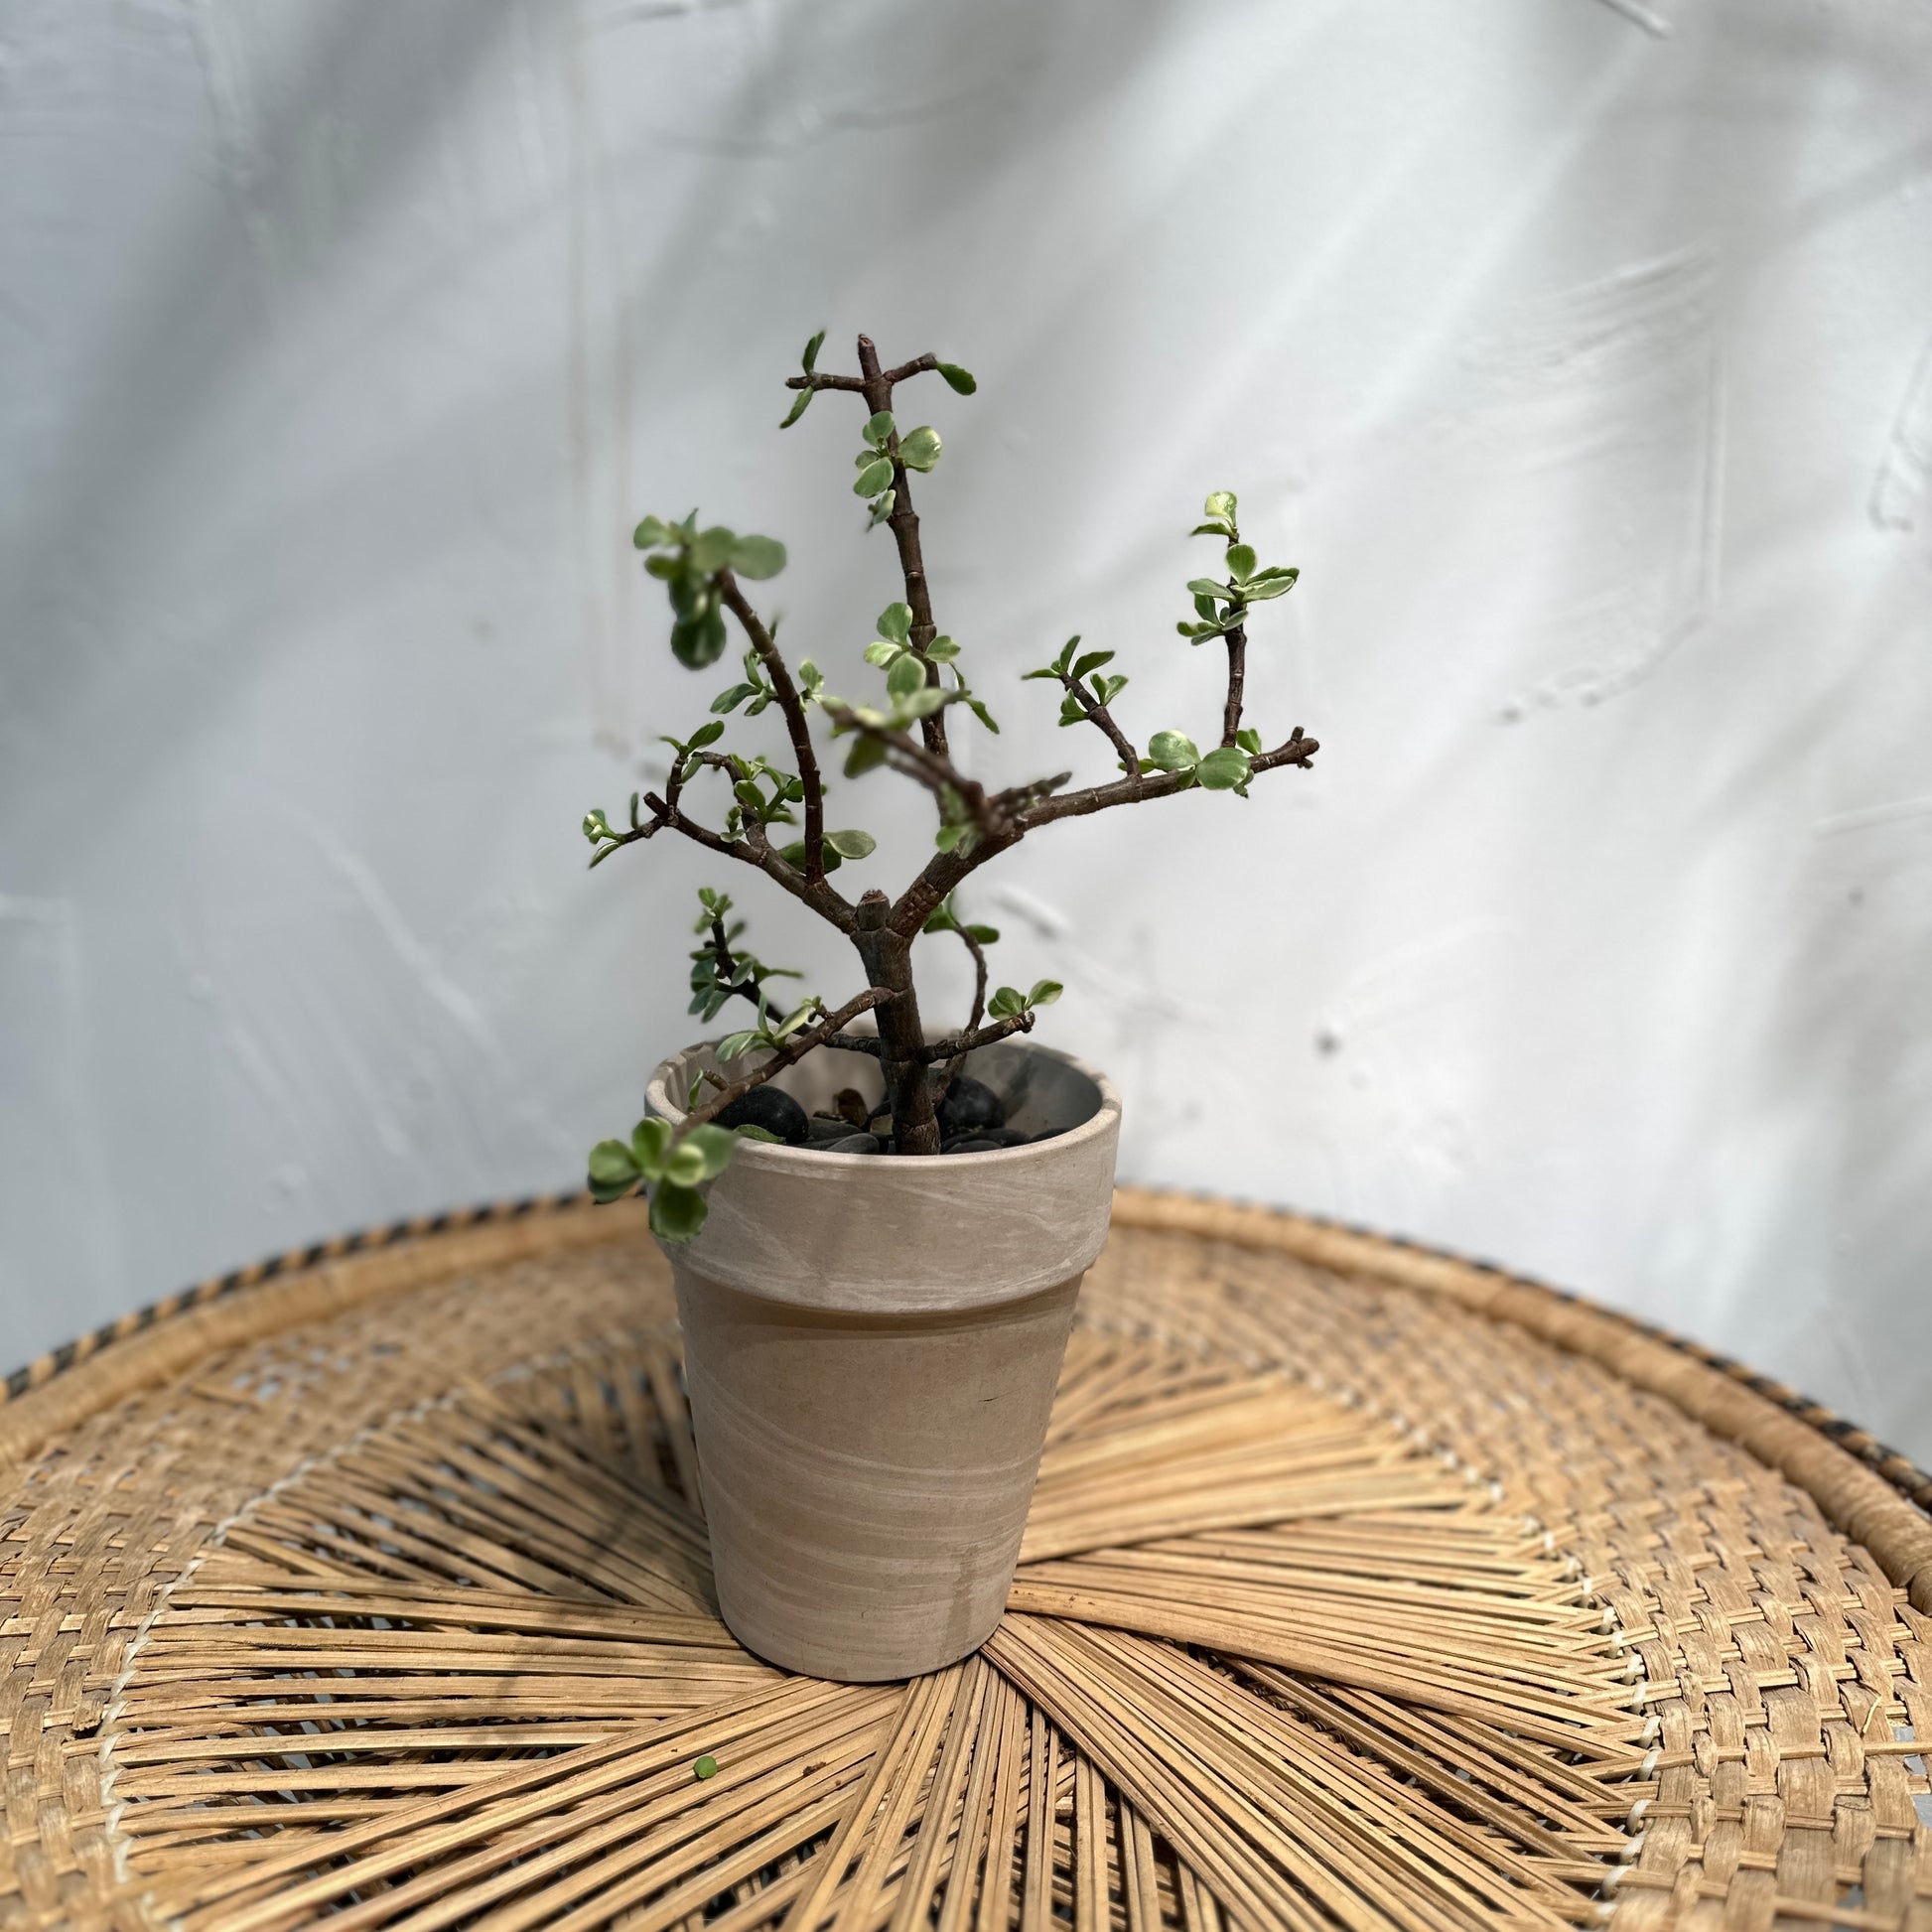 Elephant Bush Jade (Portulacaria afra) in a 6 inch pot. Indoor plant for sale by Promise Supply for delivery and pickup in Toronto